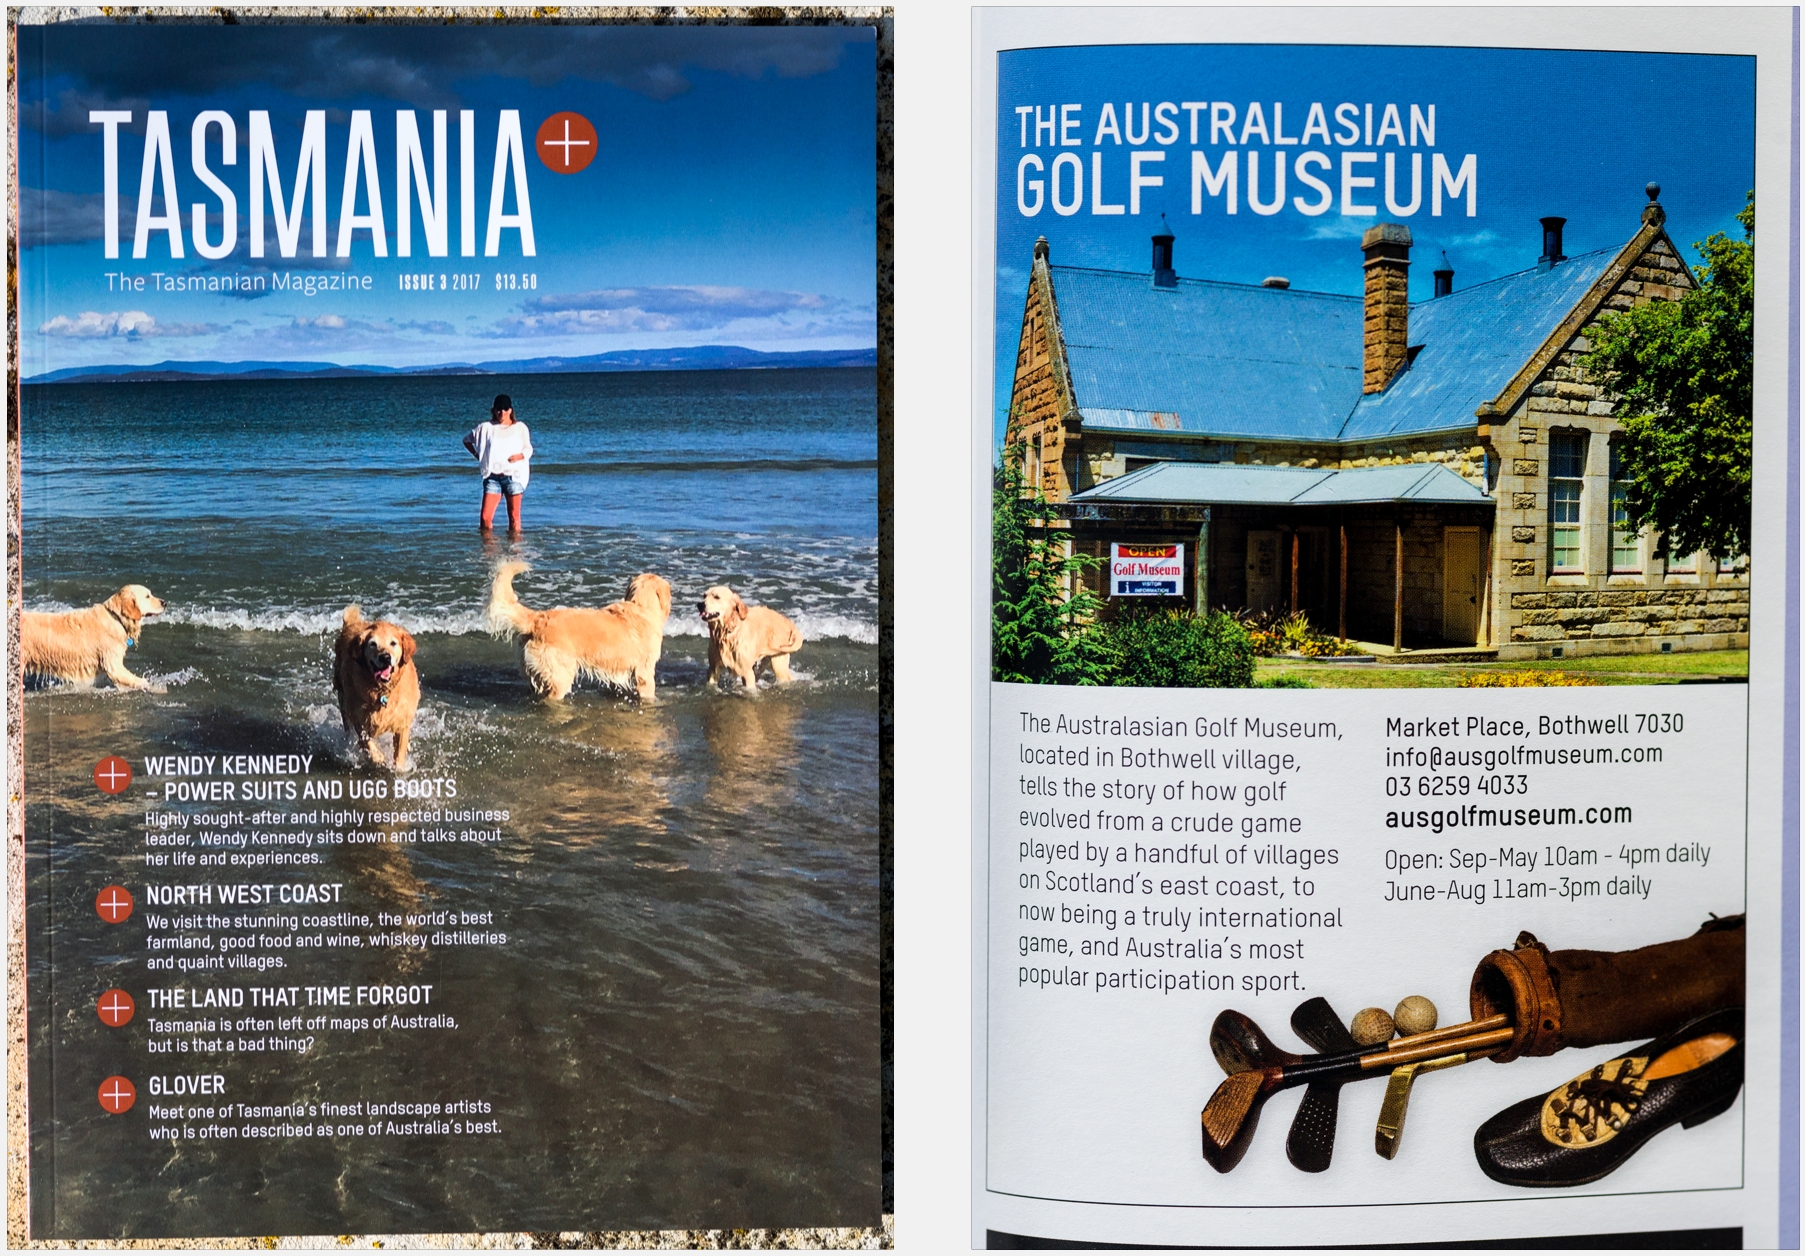 Ad for Australiasian Golf Museum Images _RLC8863 and _RLC8927